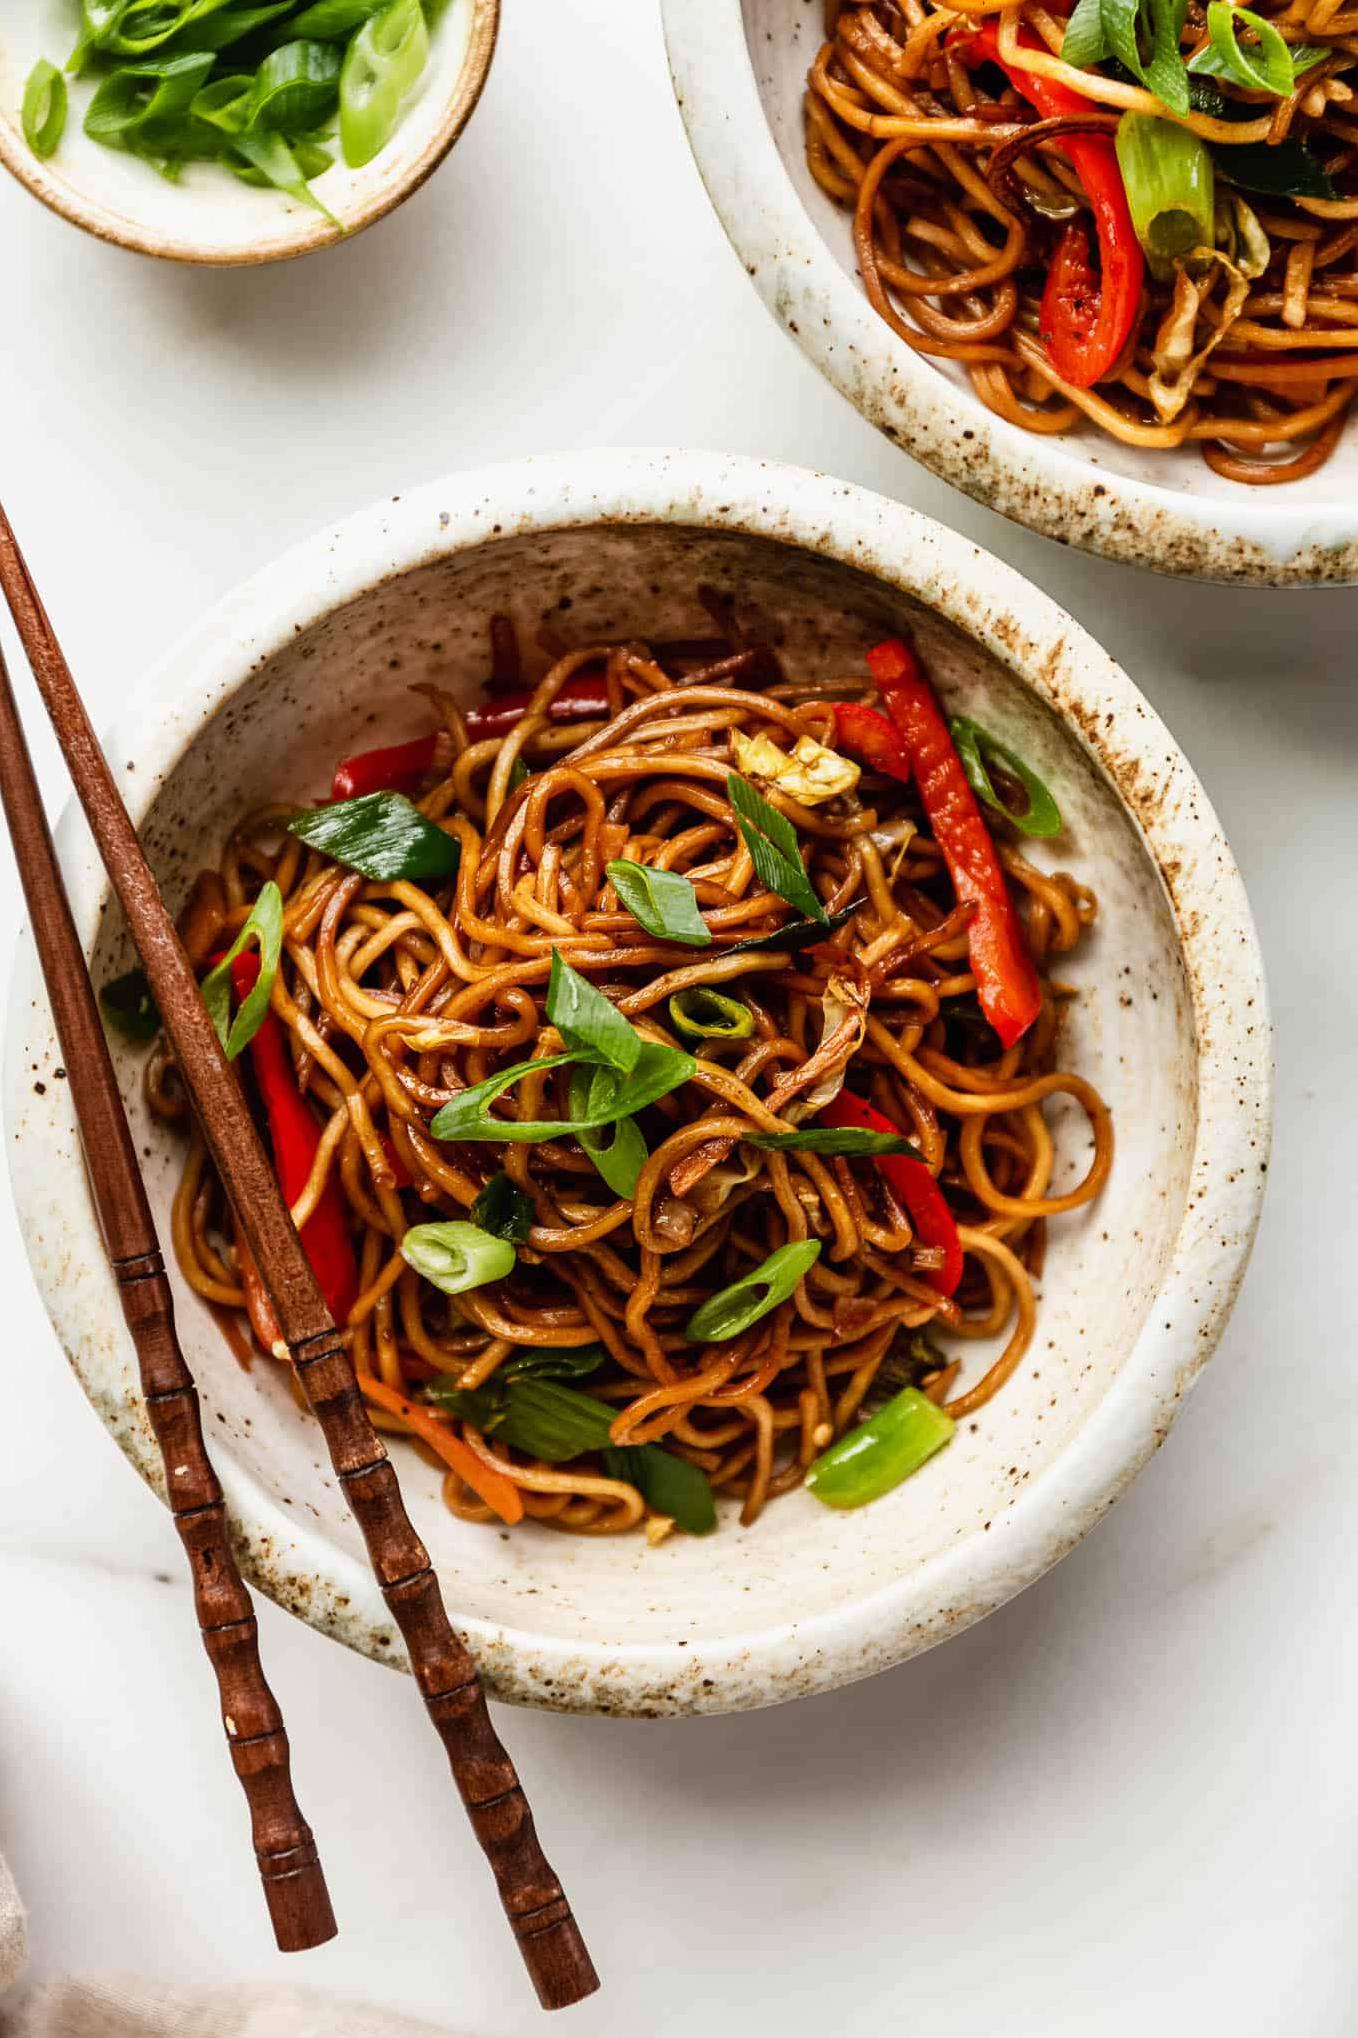  A generous serving of noodles perfectly complements the tasty veggies in this gluten-free vegan chow mein dish